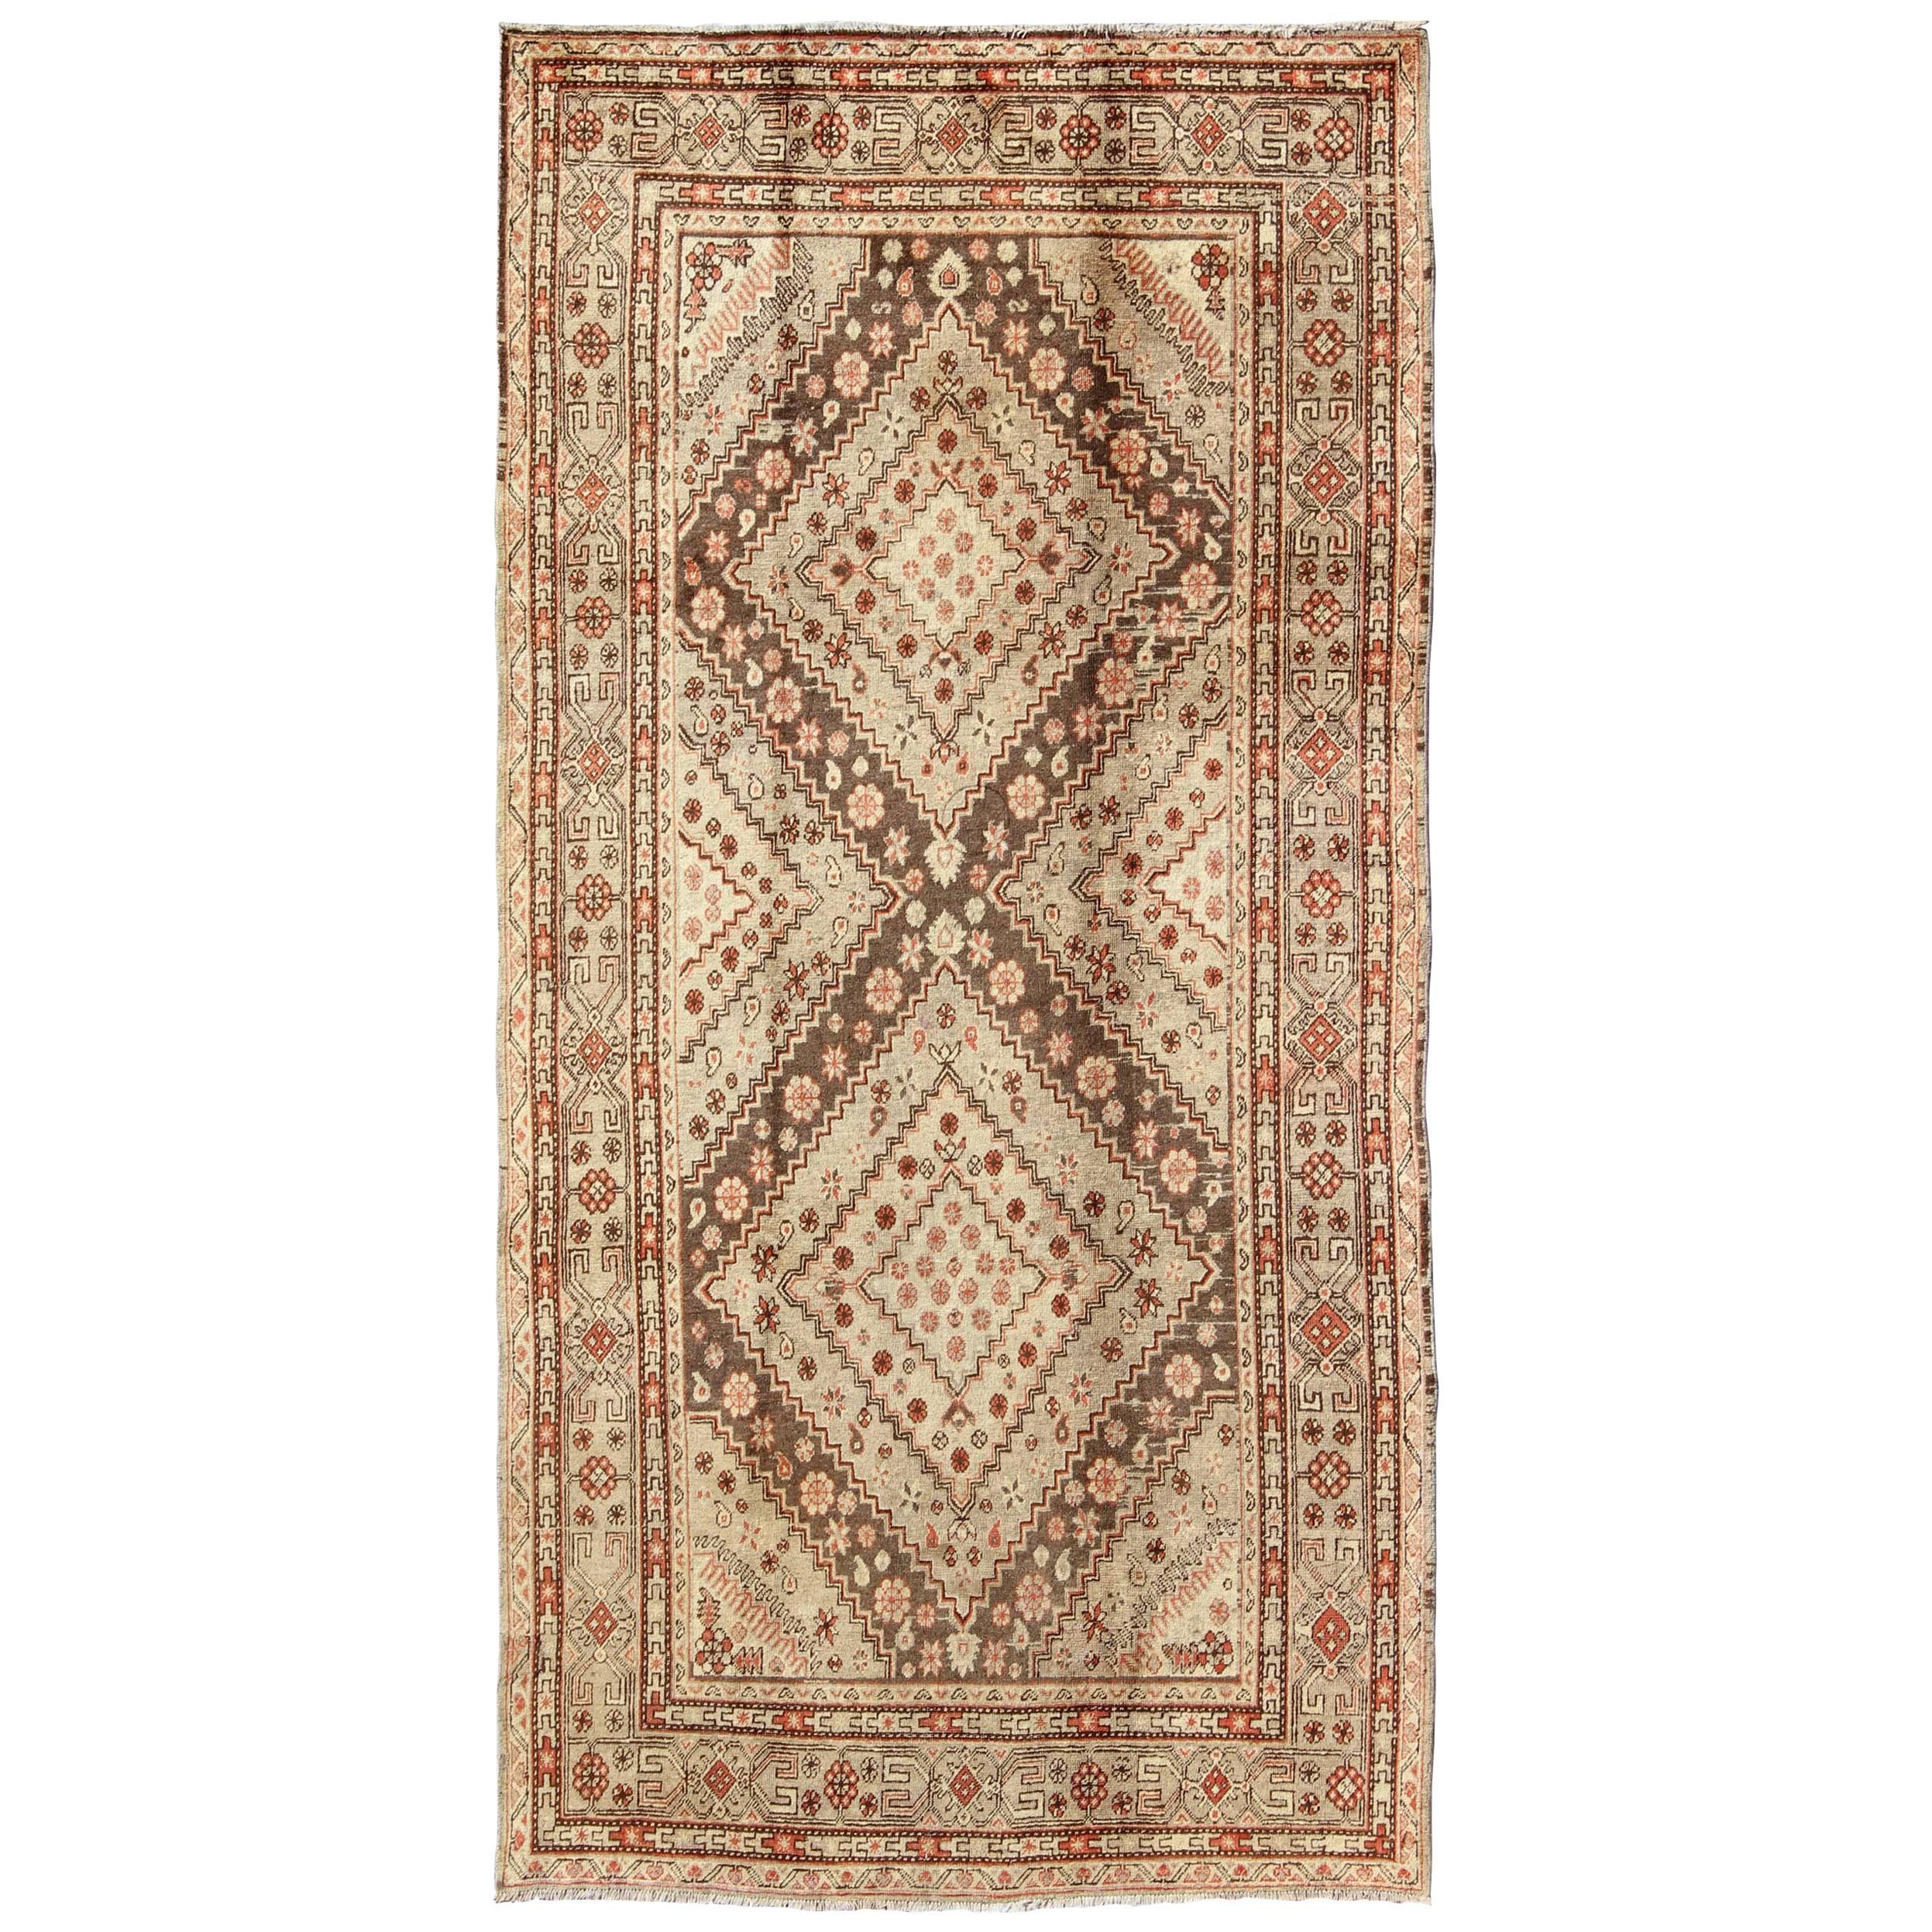 Early 20th Century Antique Khotan Rug with Paired Diamond Medallions in Brown For Sale